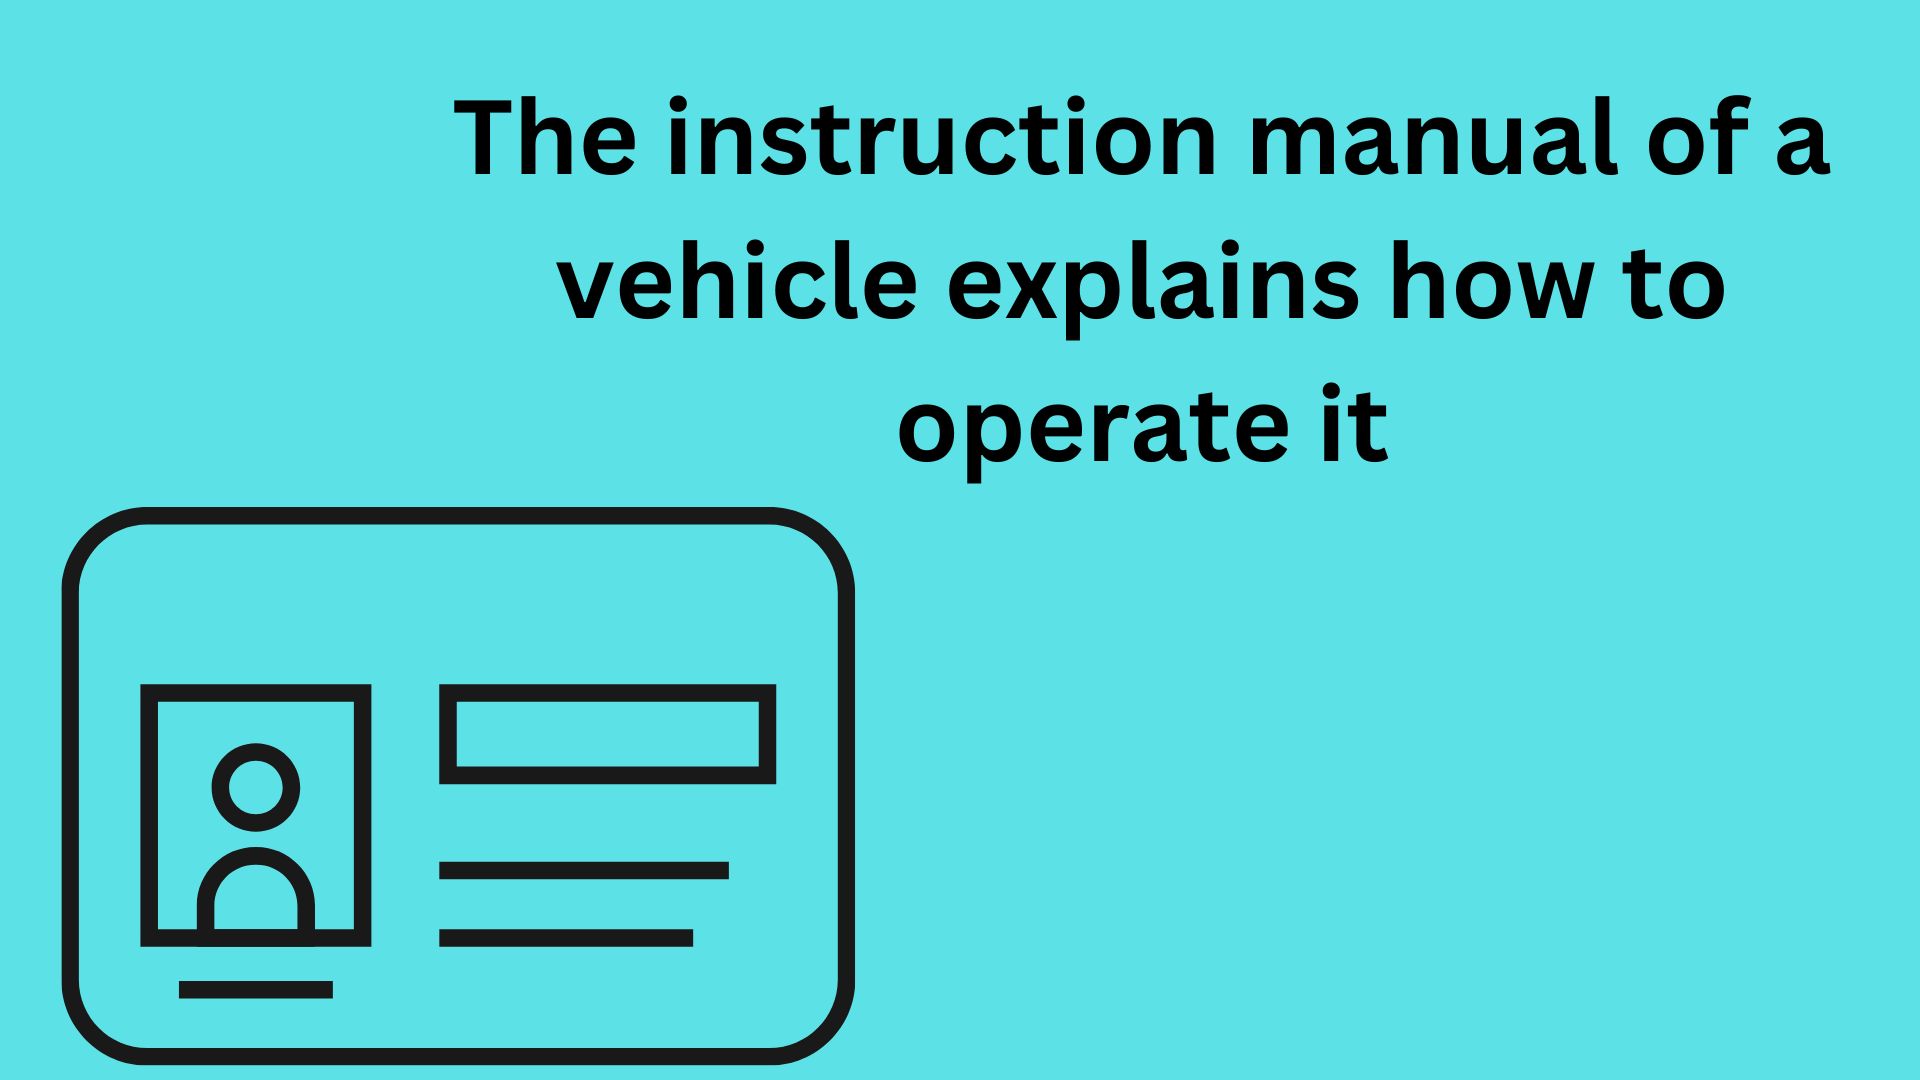 The instruction manual of a vehicle explains how to operate it